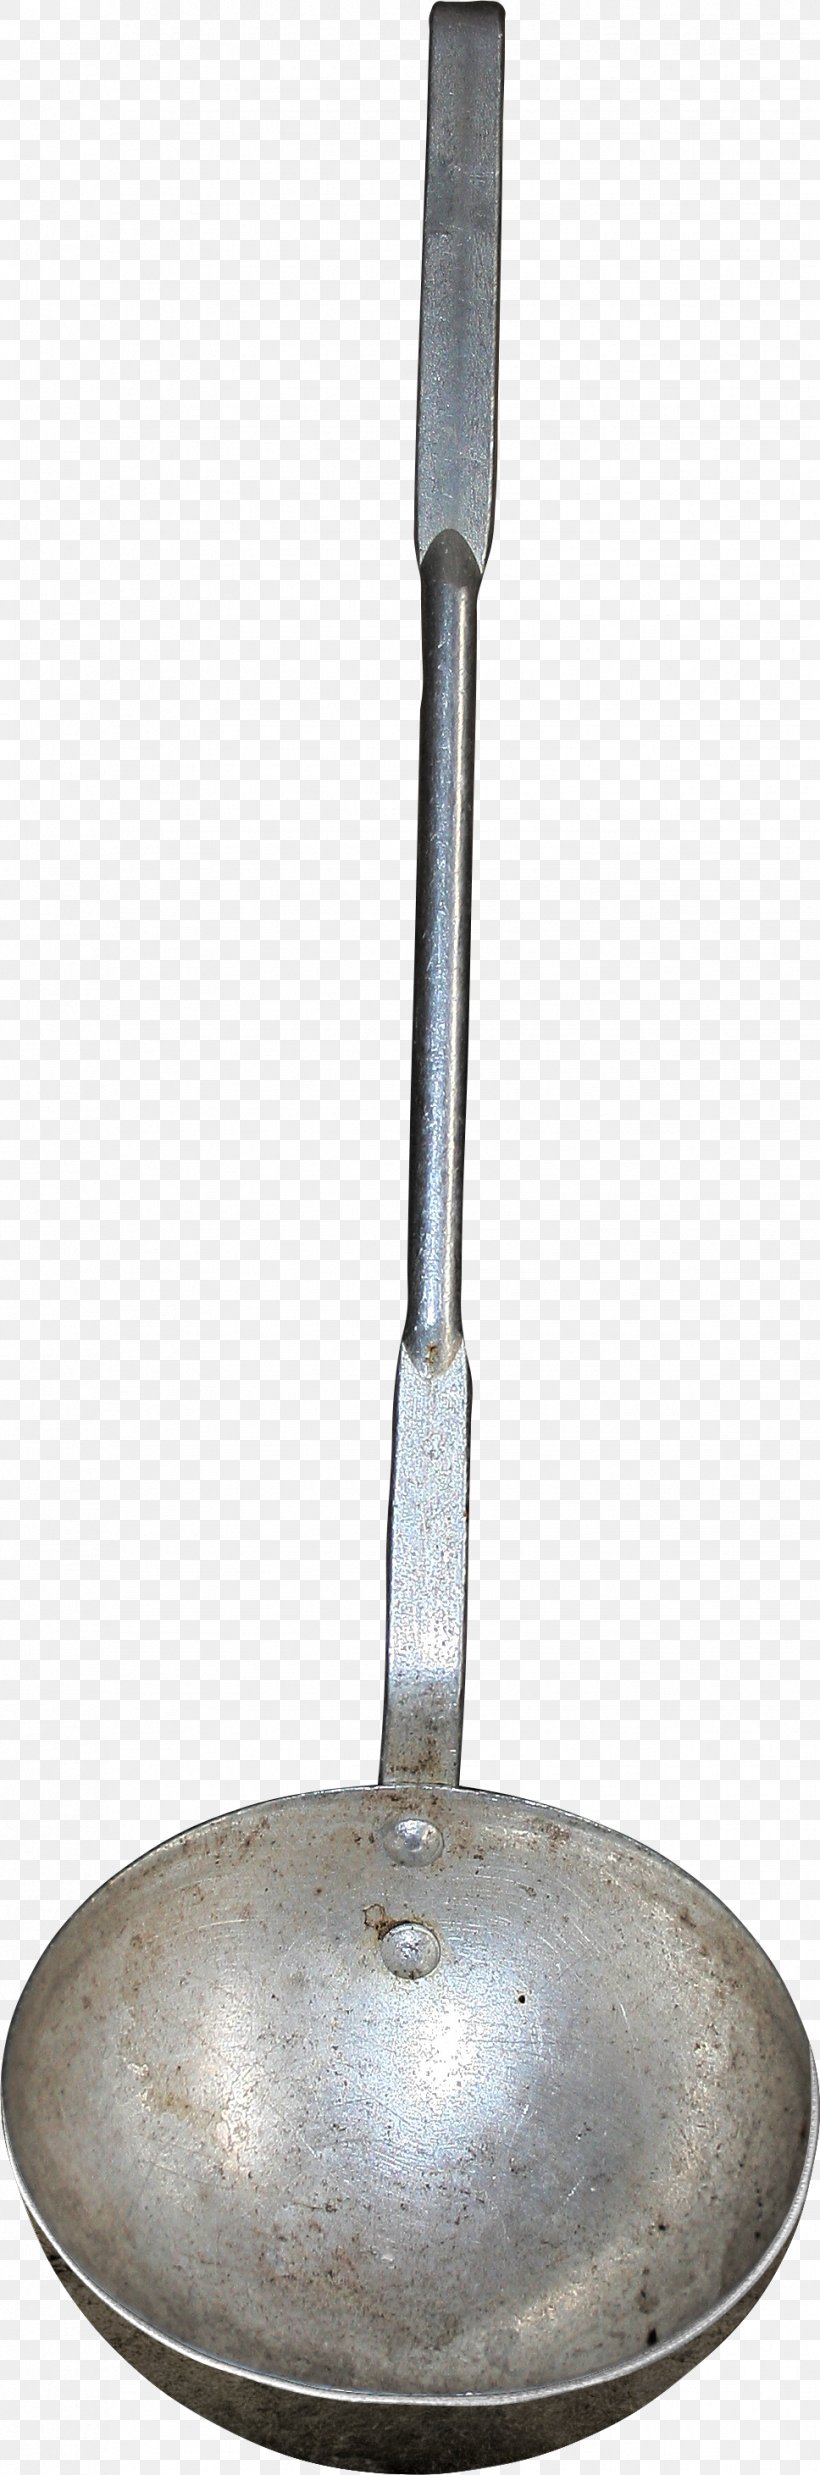 Silver Spoon, PNG, 968x2922px, Spoon, Material, Metal, Silver, Silver Spoon Download Free